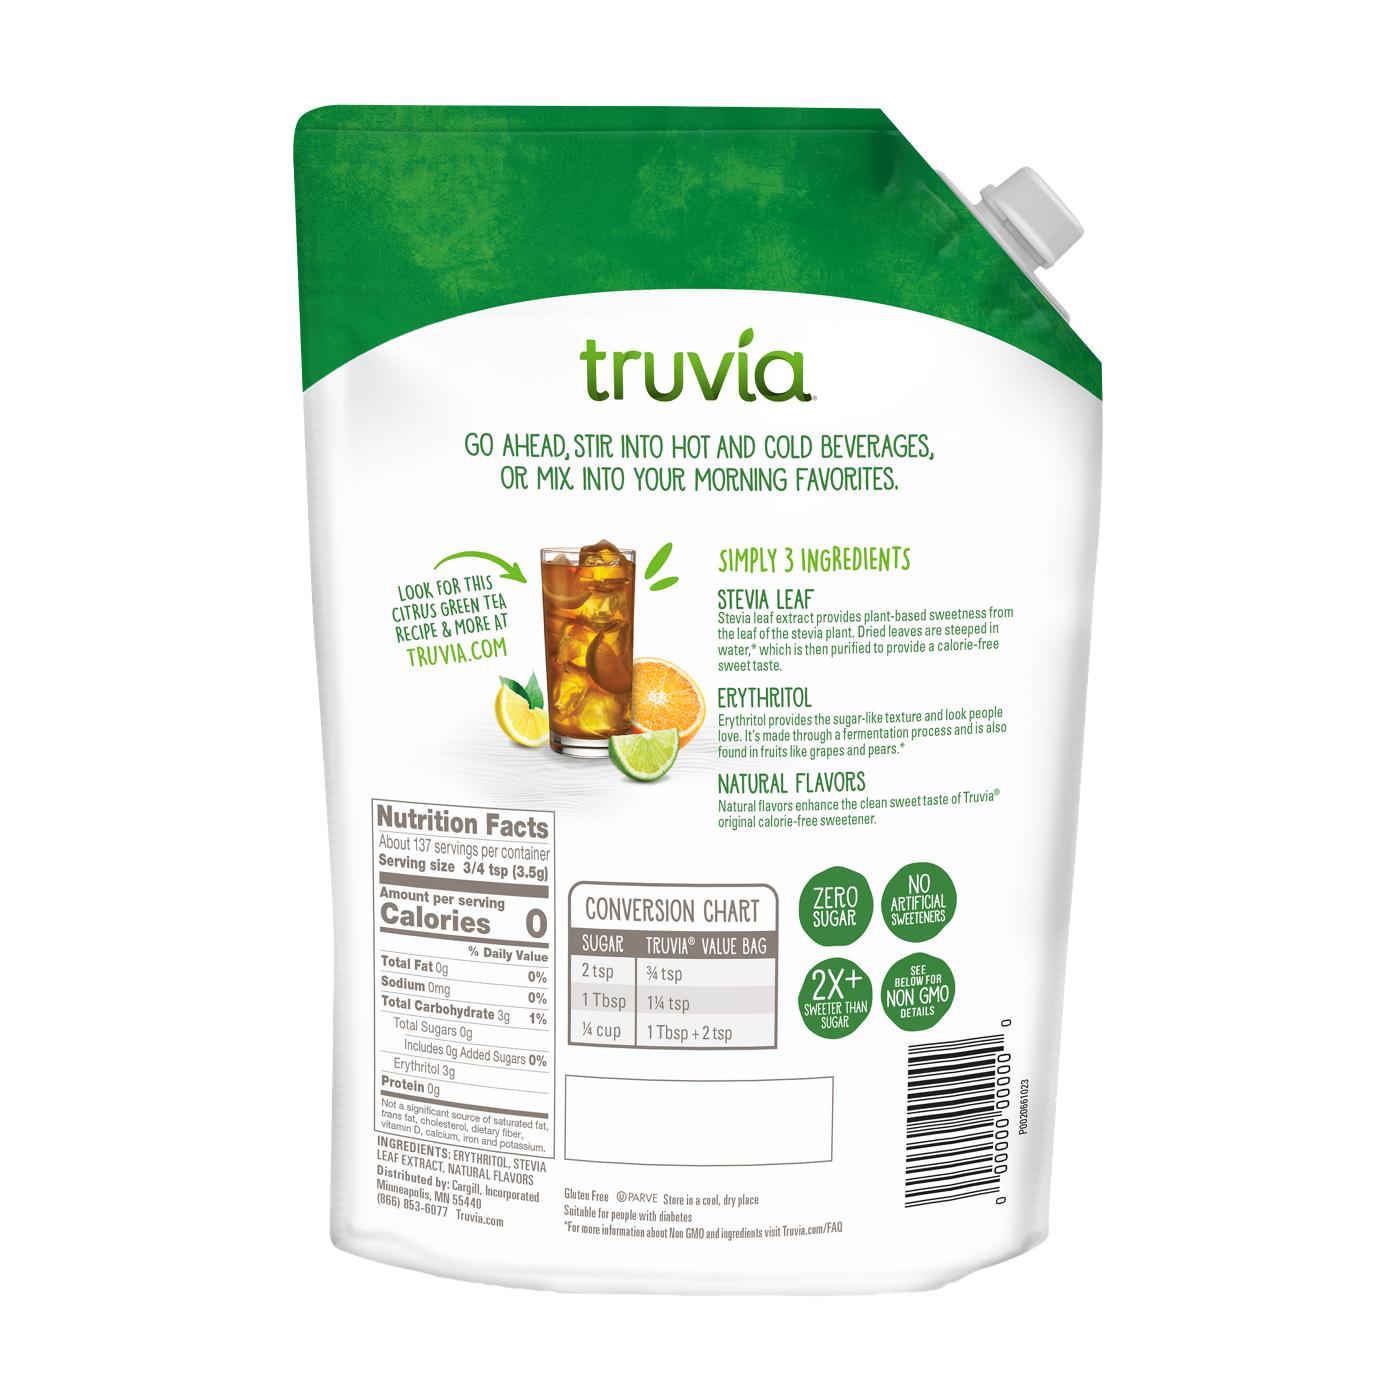 Truvia Calorie-Free Stevia Leaf Sweetener Blended With Erythritol; image 2 of 2